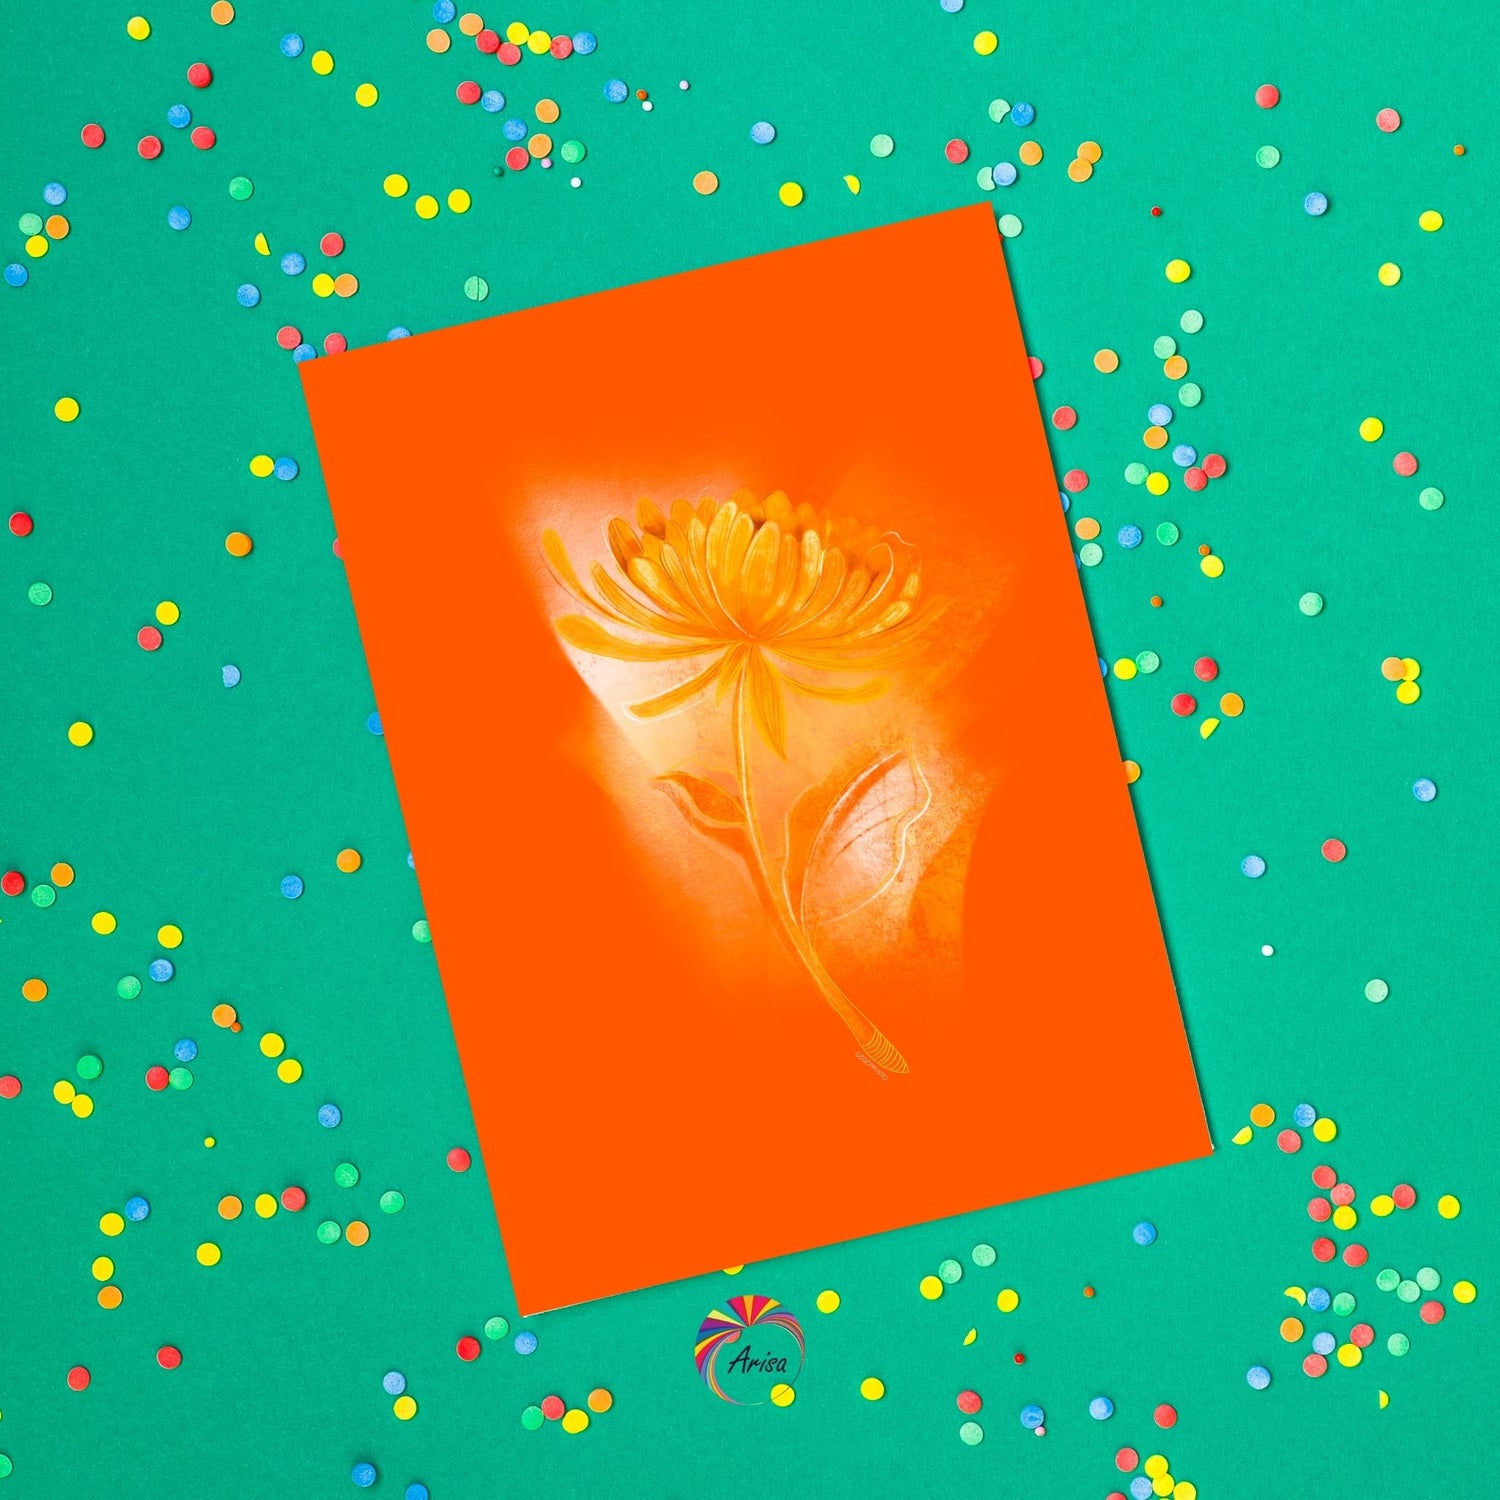 "Chrysanthemum" Greeting Card by ArisaTeam in a funfetti background ideal as a birthday card.